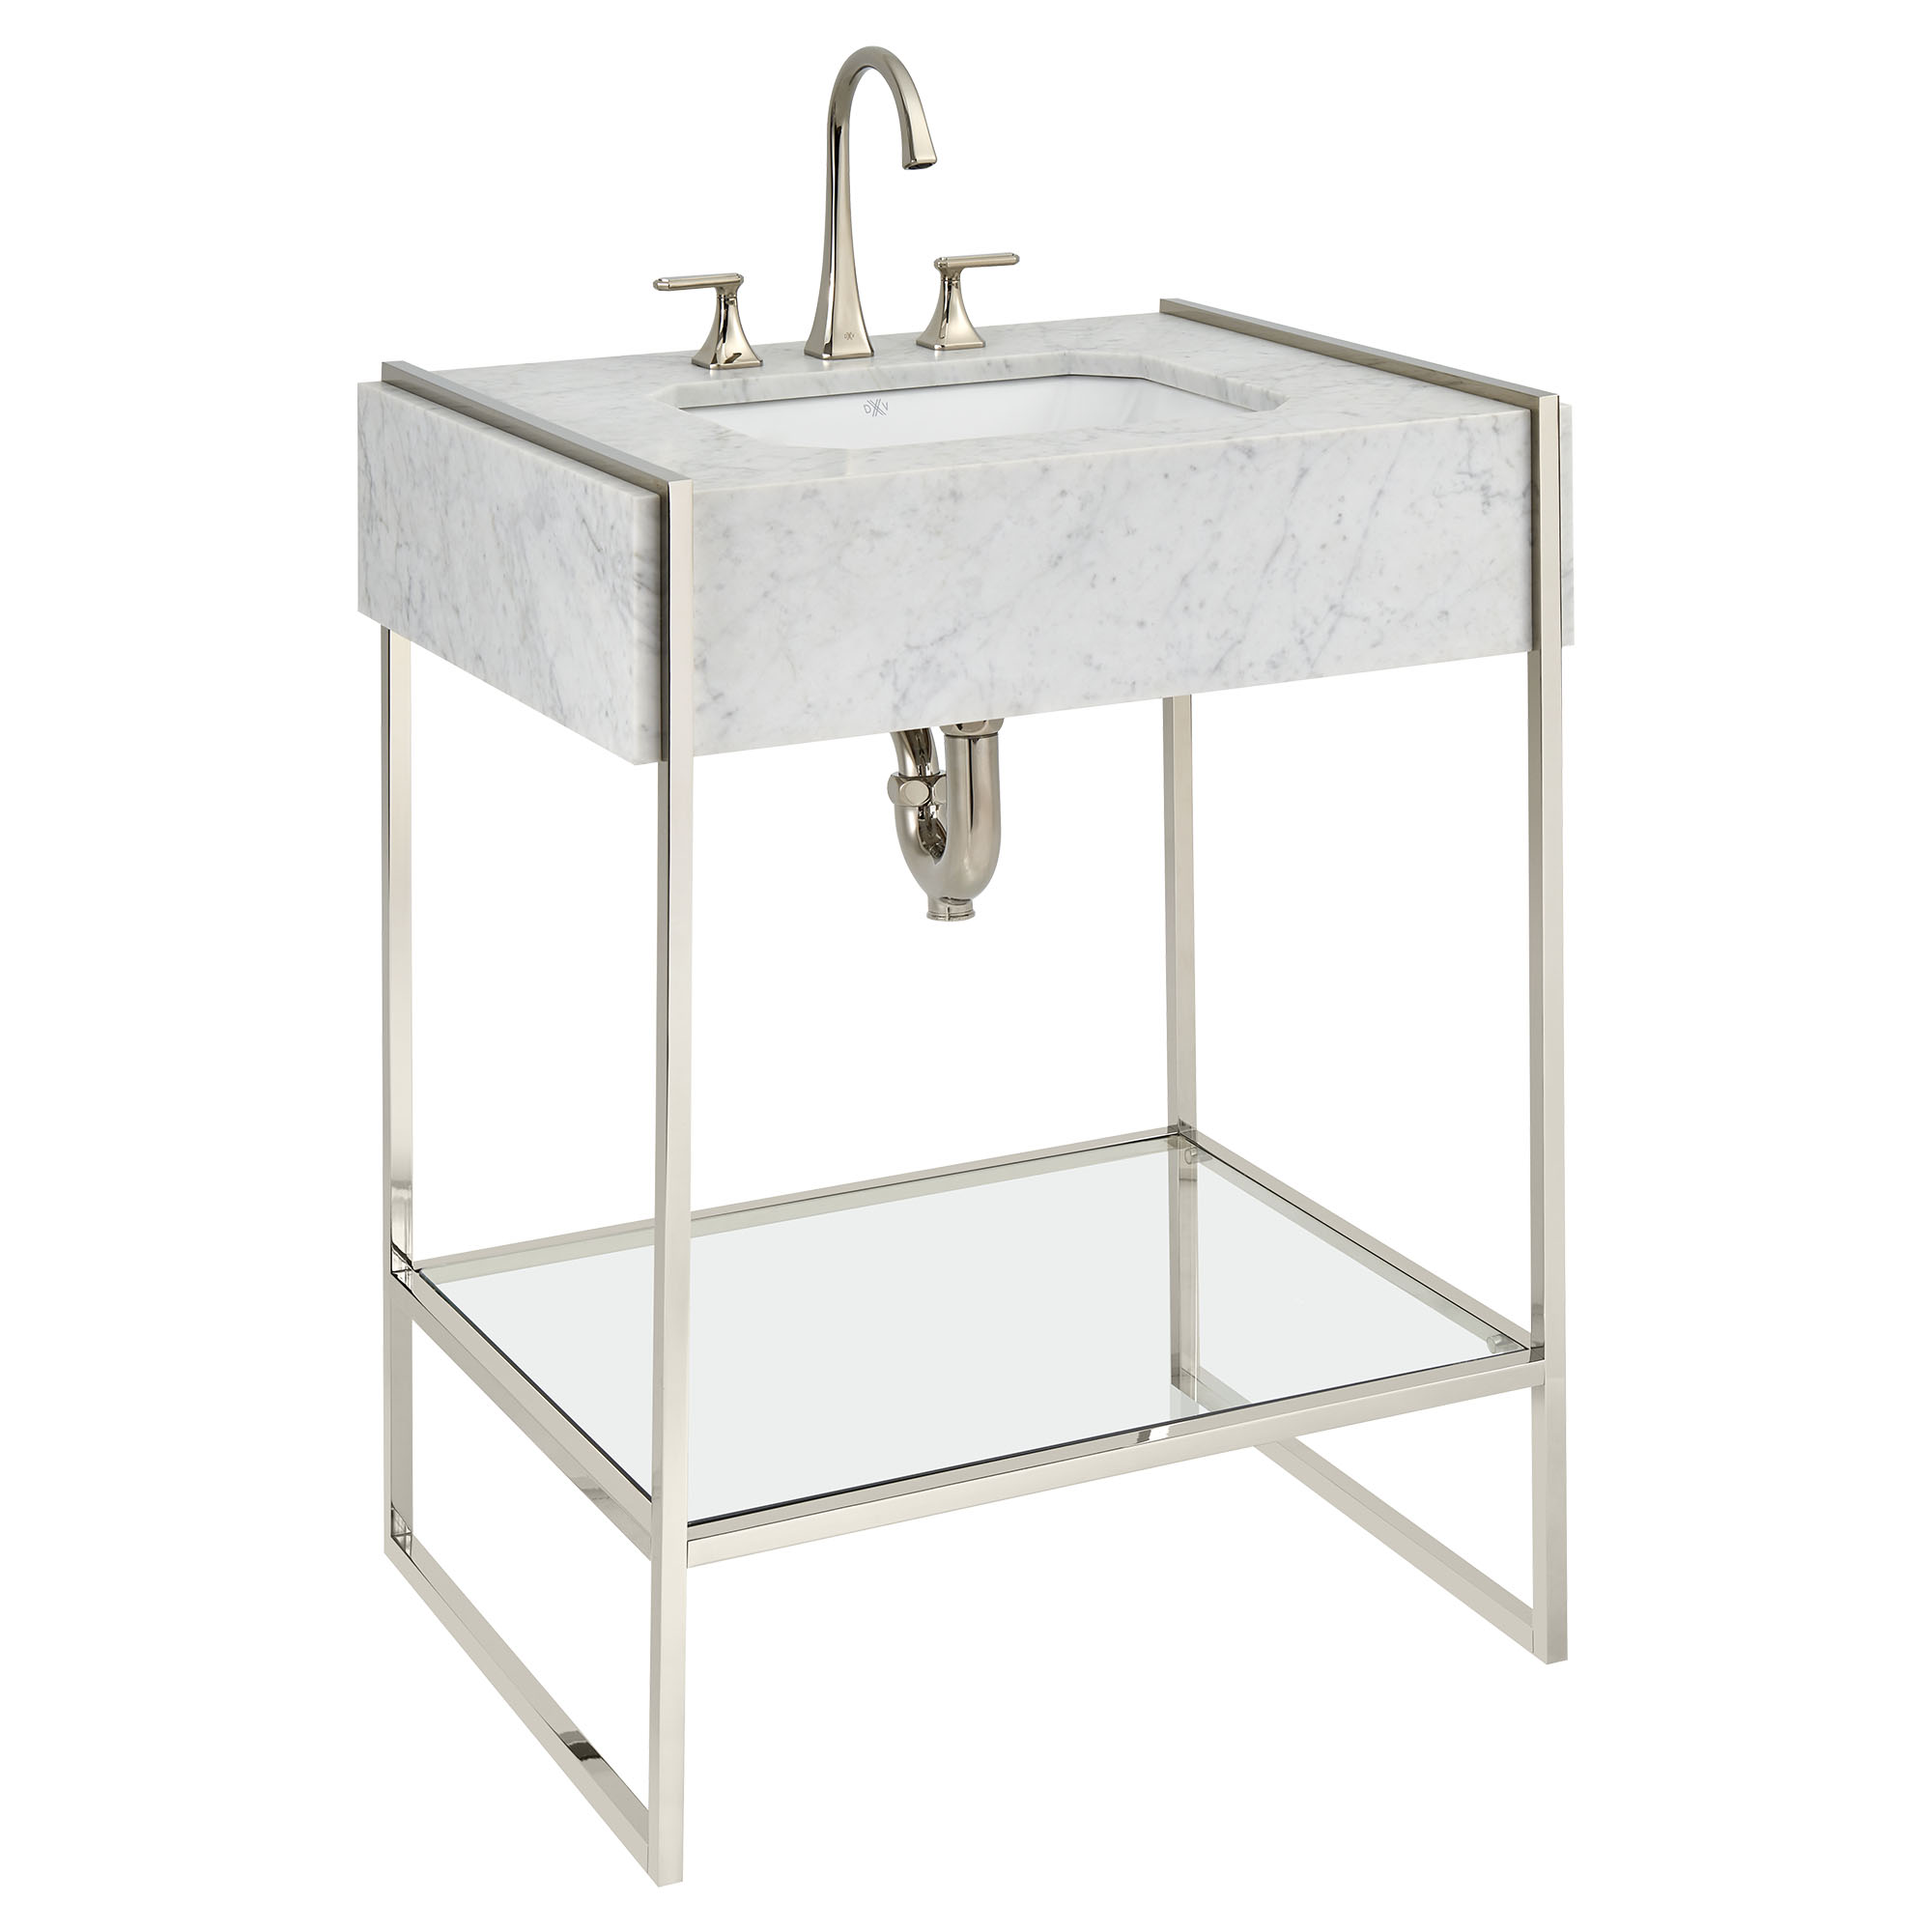 30 in. Console Legs with Glass Shelf